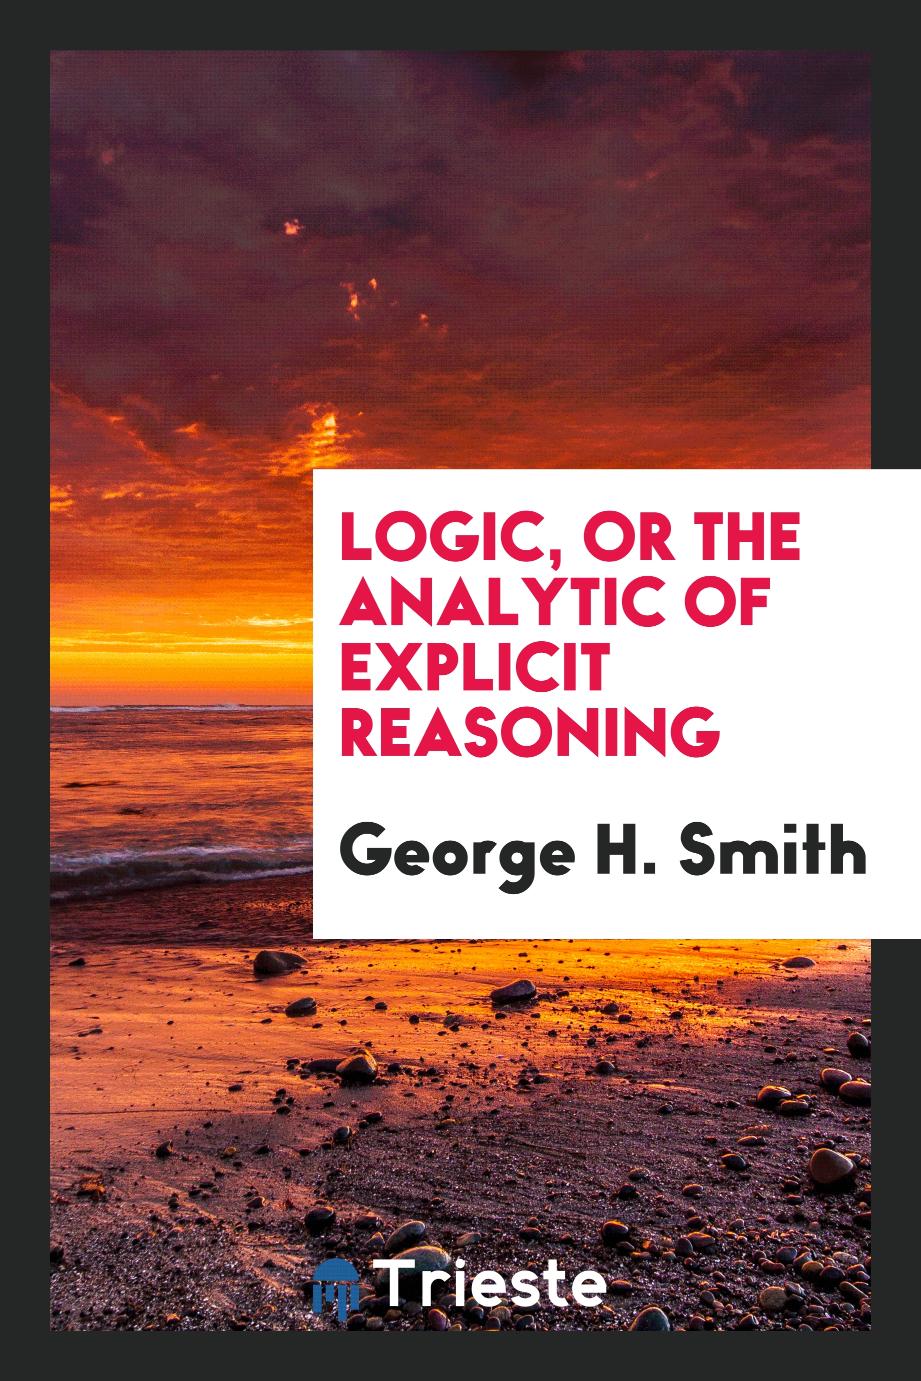 Logic, or the Analytic of Explicit Reasoning